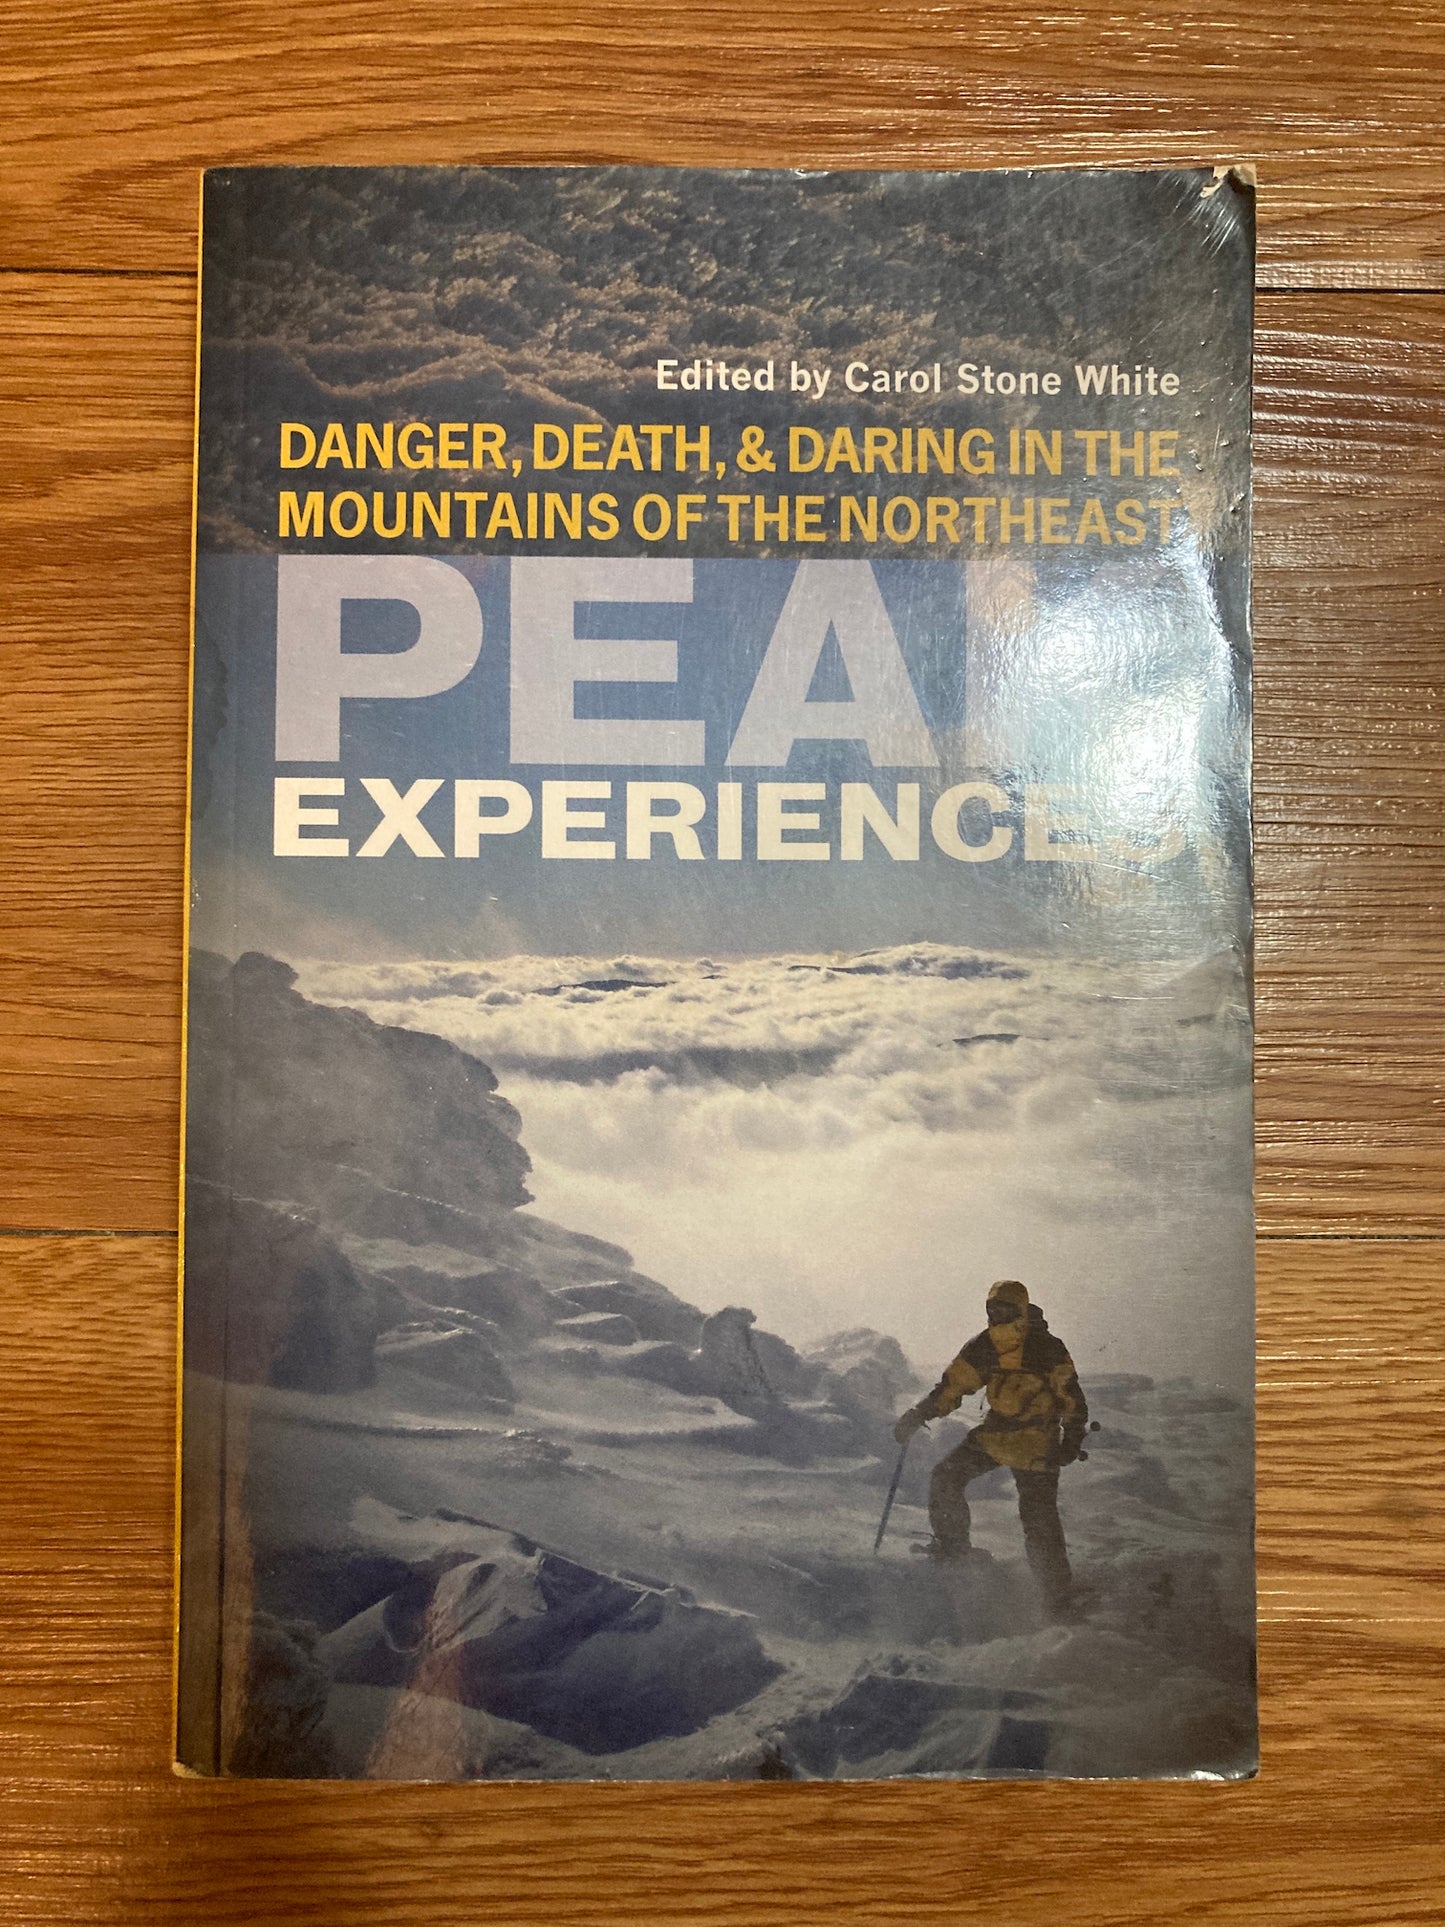 Peak Experiences: Danger, Death, and Daring in the Mountains